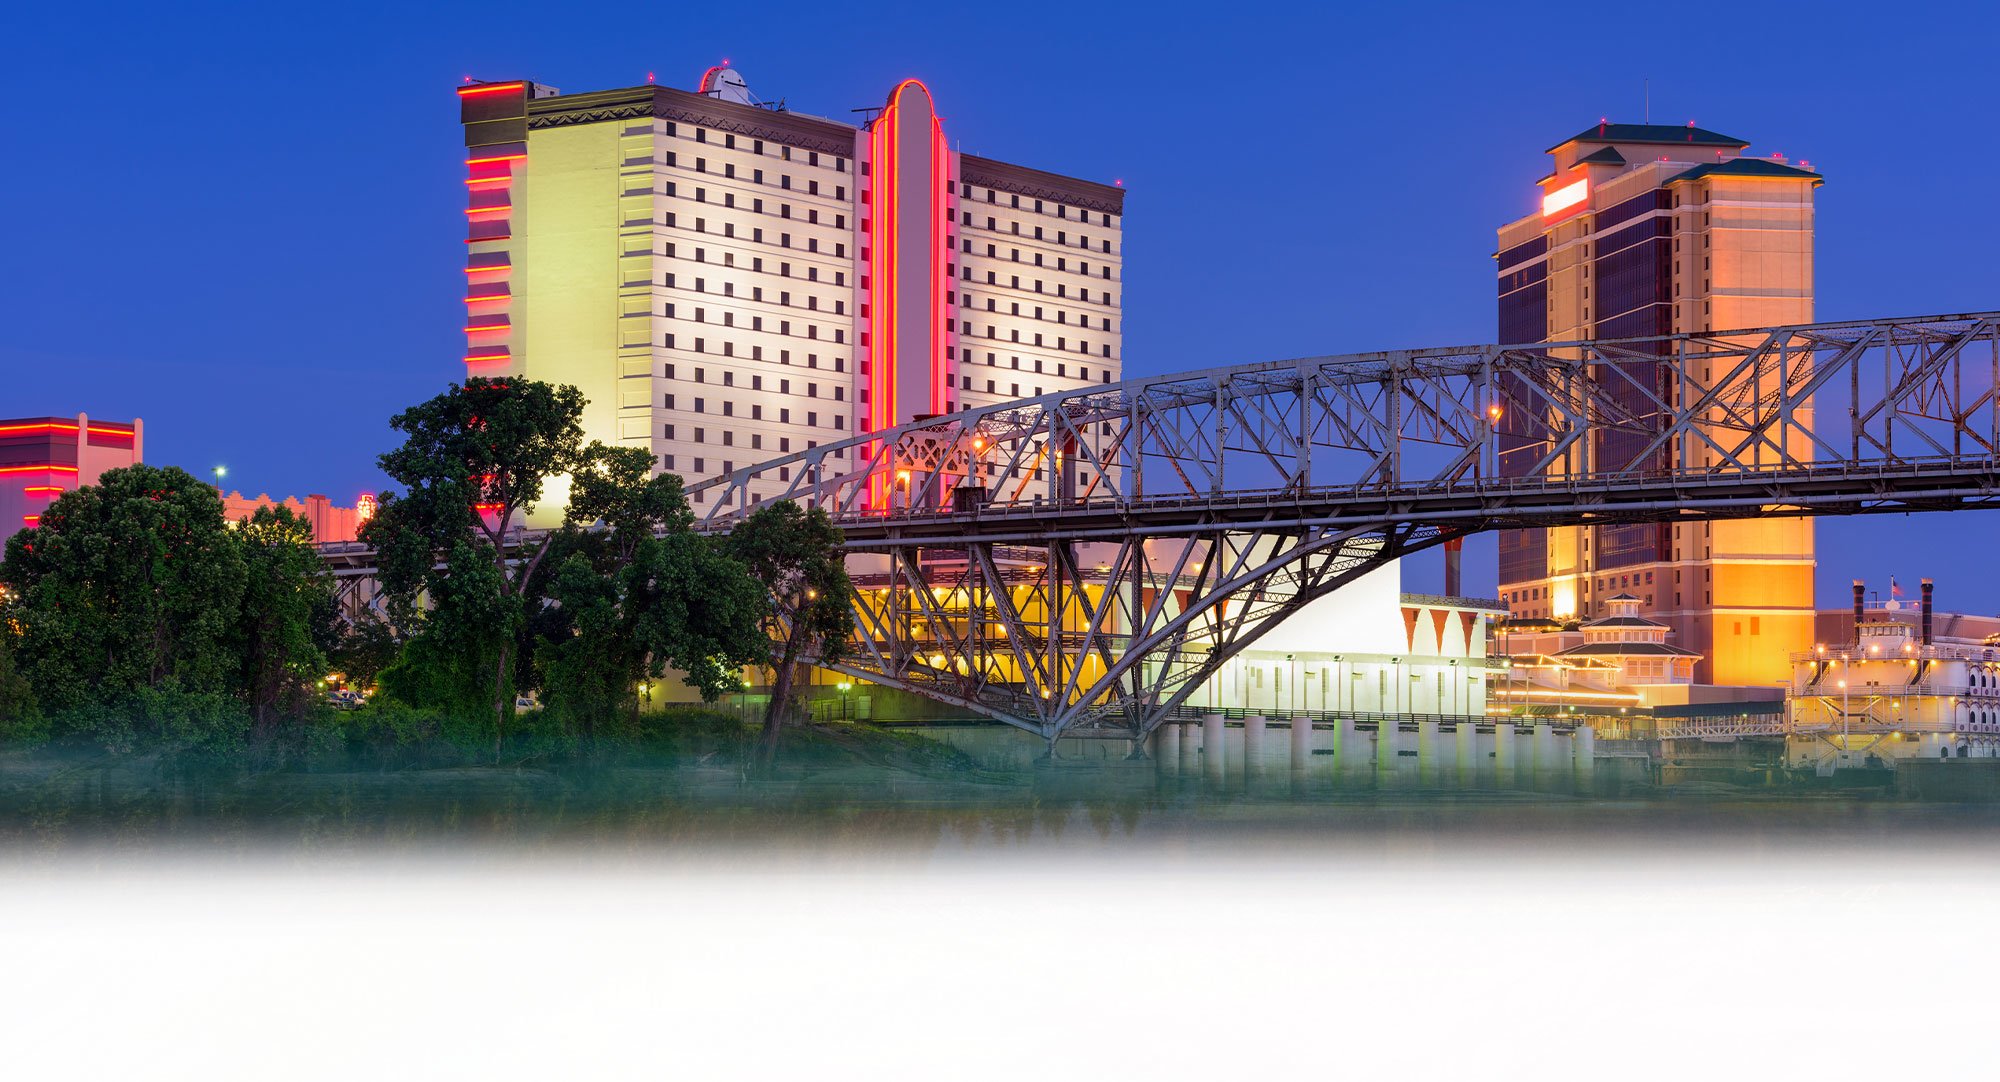 Cross Country Healthcare color photo of the Shreveport, Louisiana Casino and Hotel with bridge in foreground. 